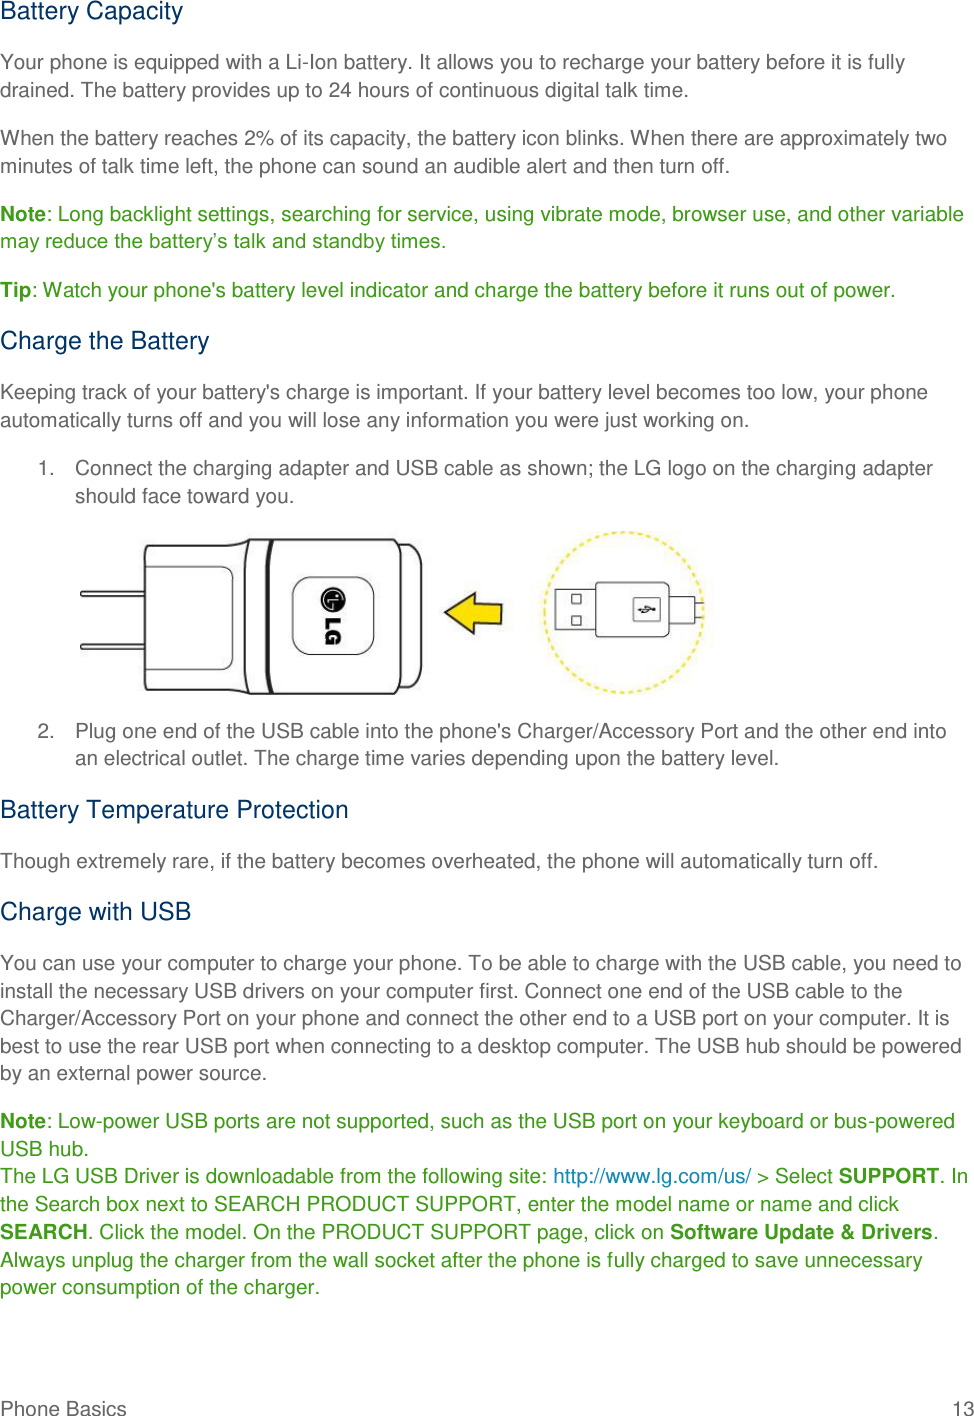 Phone Basics  13 Battery Capacity Your phone is equipped with a Li-Ion battery. It allows you to recharge your battery before it is fully drained. The battery provides up to 24 hours of continuous digital talk time. When the battery reaches 2% of its capacity, the battery icon blinks. When there are approximately two minutes of talk time left, the phone can sound an audible alert and then turn off. Note: Long backlight settings, searching for service, using vibrate mode, browser use, and other variable may reduce the battery‘s talk and standby times. Tip: Watch your phone&apos;s battery level indicator and charge the battery before it runs out of power. Charge the Battery  Keeping track of your battery&apos;s charge is important. If your battery level becomes too low, your phone automatically turns off and you will lose any information you were just working on.  1.  Connect the charging adapter and USB cable as shown; the LG logo on the charging adapter should face toward you.     2.  Plug one end of the USB cable into the phone&apos;s Charger/Accessory Port and the other end into an electrical outlet. The charge time varies depending upon the battery level.  Battery Temperature Protection Though extremely rare, if the battery becomes overheated, the phone will automatically turn off. Charge with USB You can use your computer to charge your phone. To be able to charge with the USB cable, you need to install the necessary USB drivers on your computer first. Connect one end of the USB cable to the Charger/Accessory Port on your phone and connect the other end to a USB port on your computer. It is best to use the rear USB port when connecting to a desktop computer. The USB hub should be powered by an external power source. Note: Low-power USB ports are not supported, such as the USB port on your keyboard or bus-powered USB hub. The LG USB Driver is downloadable from the following site: http://www.lg.com/us/ &gt; Select SUPPORT. In the Search box next to SEARCH PRODUCT SUPPORT, enter the model name or name and click SEARCH. Click the model. On the PRODUCT SUPPORT page, click on Software Update &amp; Drivers. Always unplug the charger from the wall socket after the phone is fully charged to save unnecessary power consumption of the charger. 